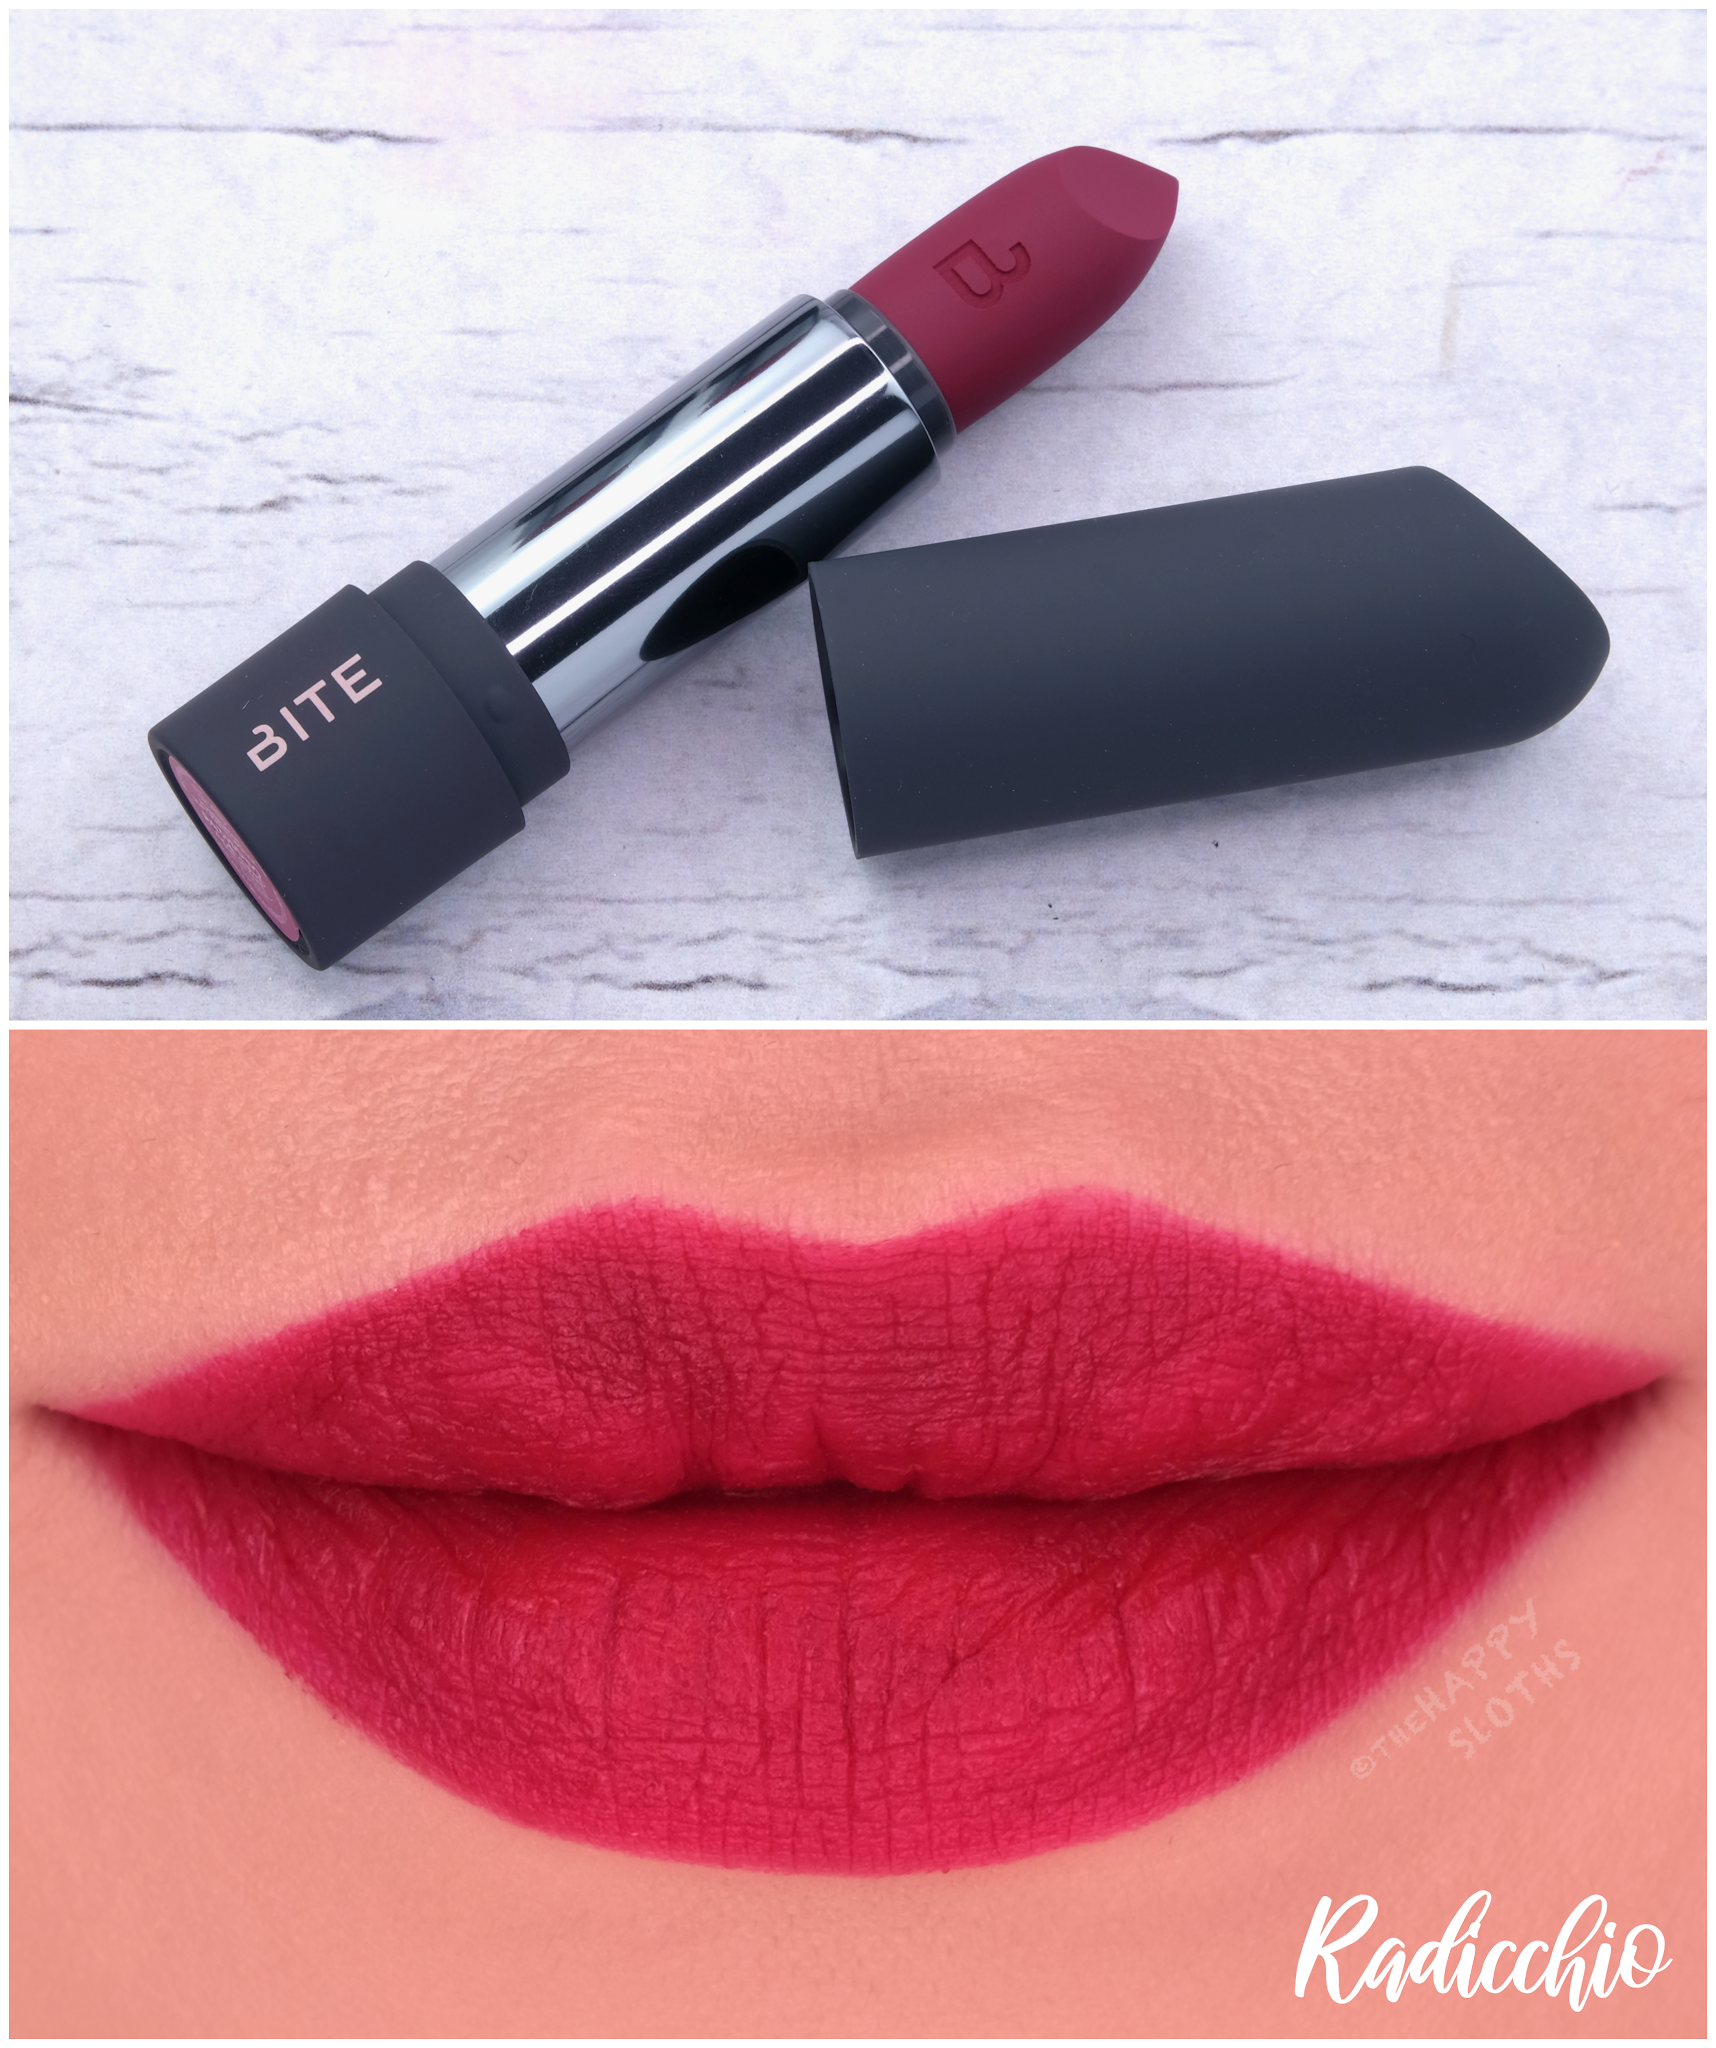 Bite Beauty | Power Move Soft Matte Lipstick in "Radicchio": Review and Swatches